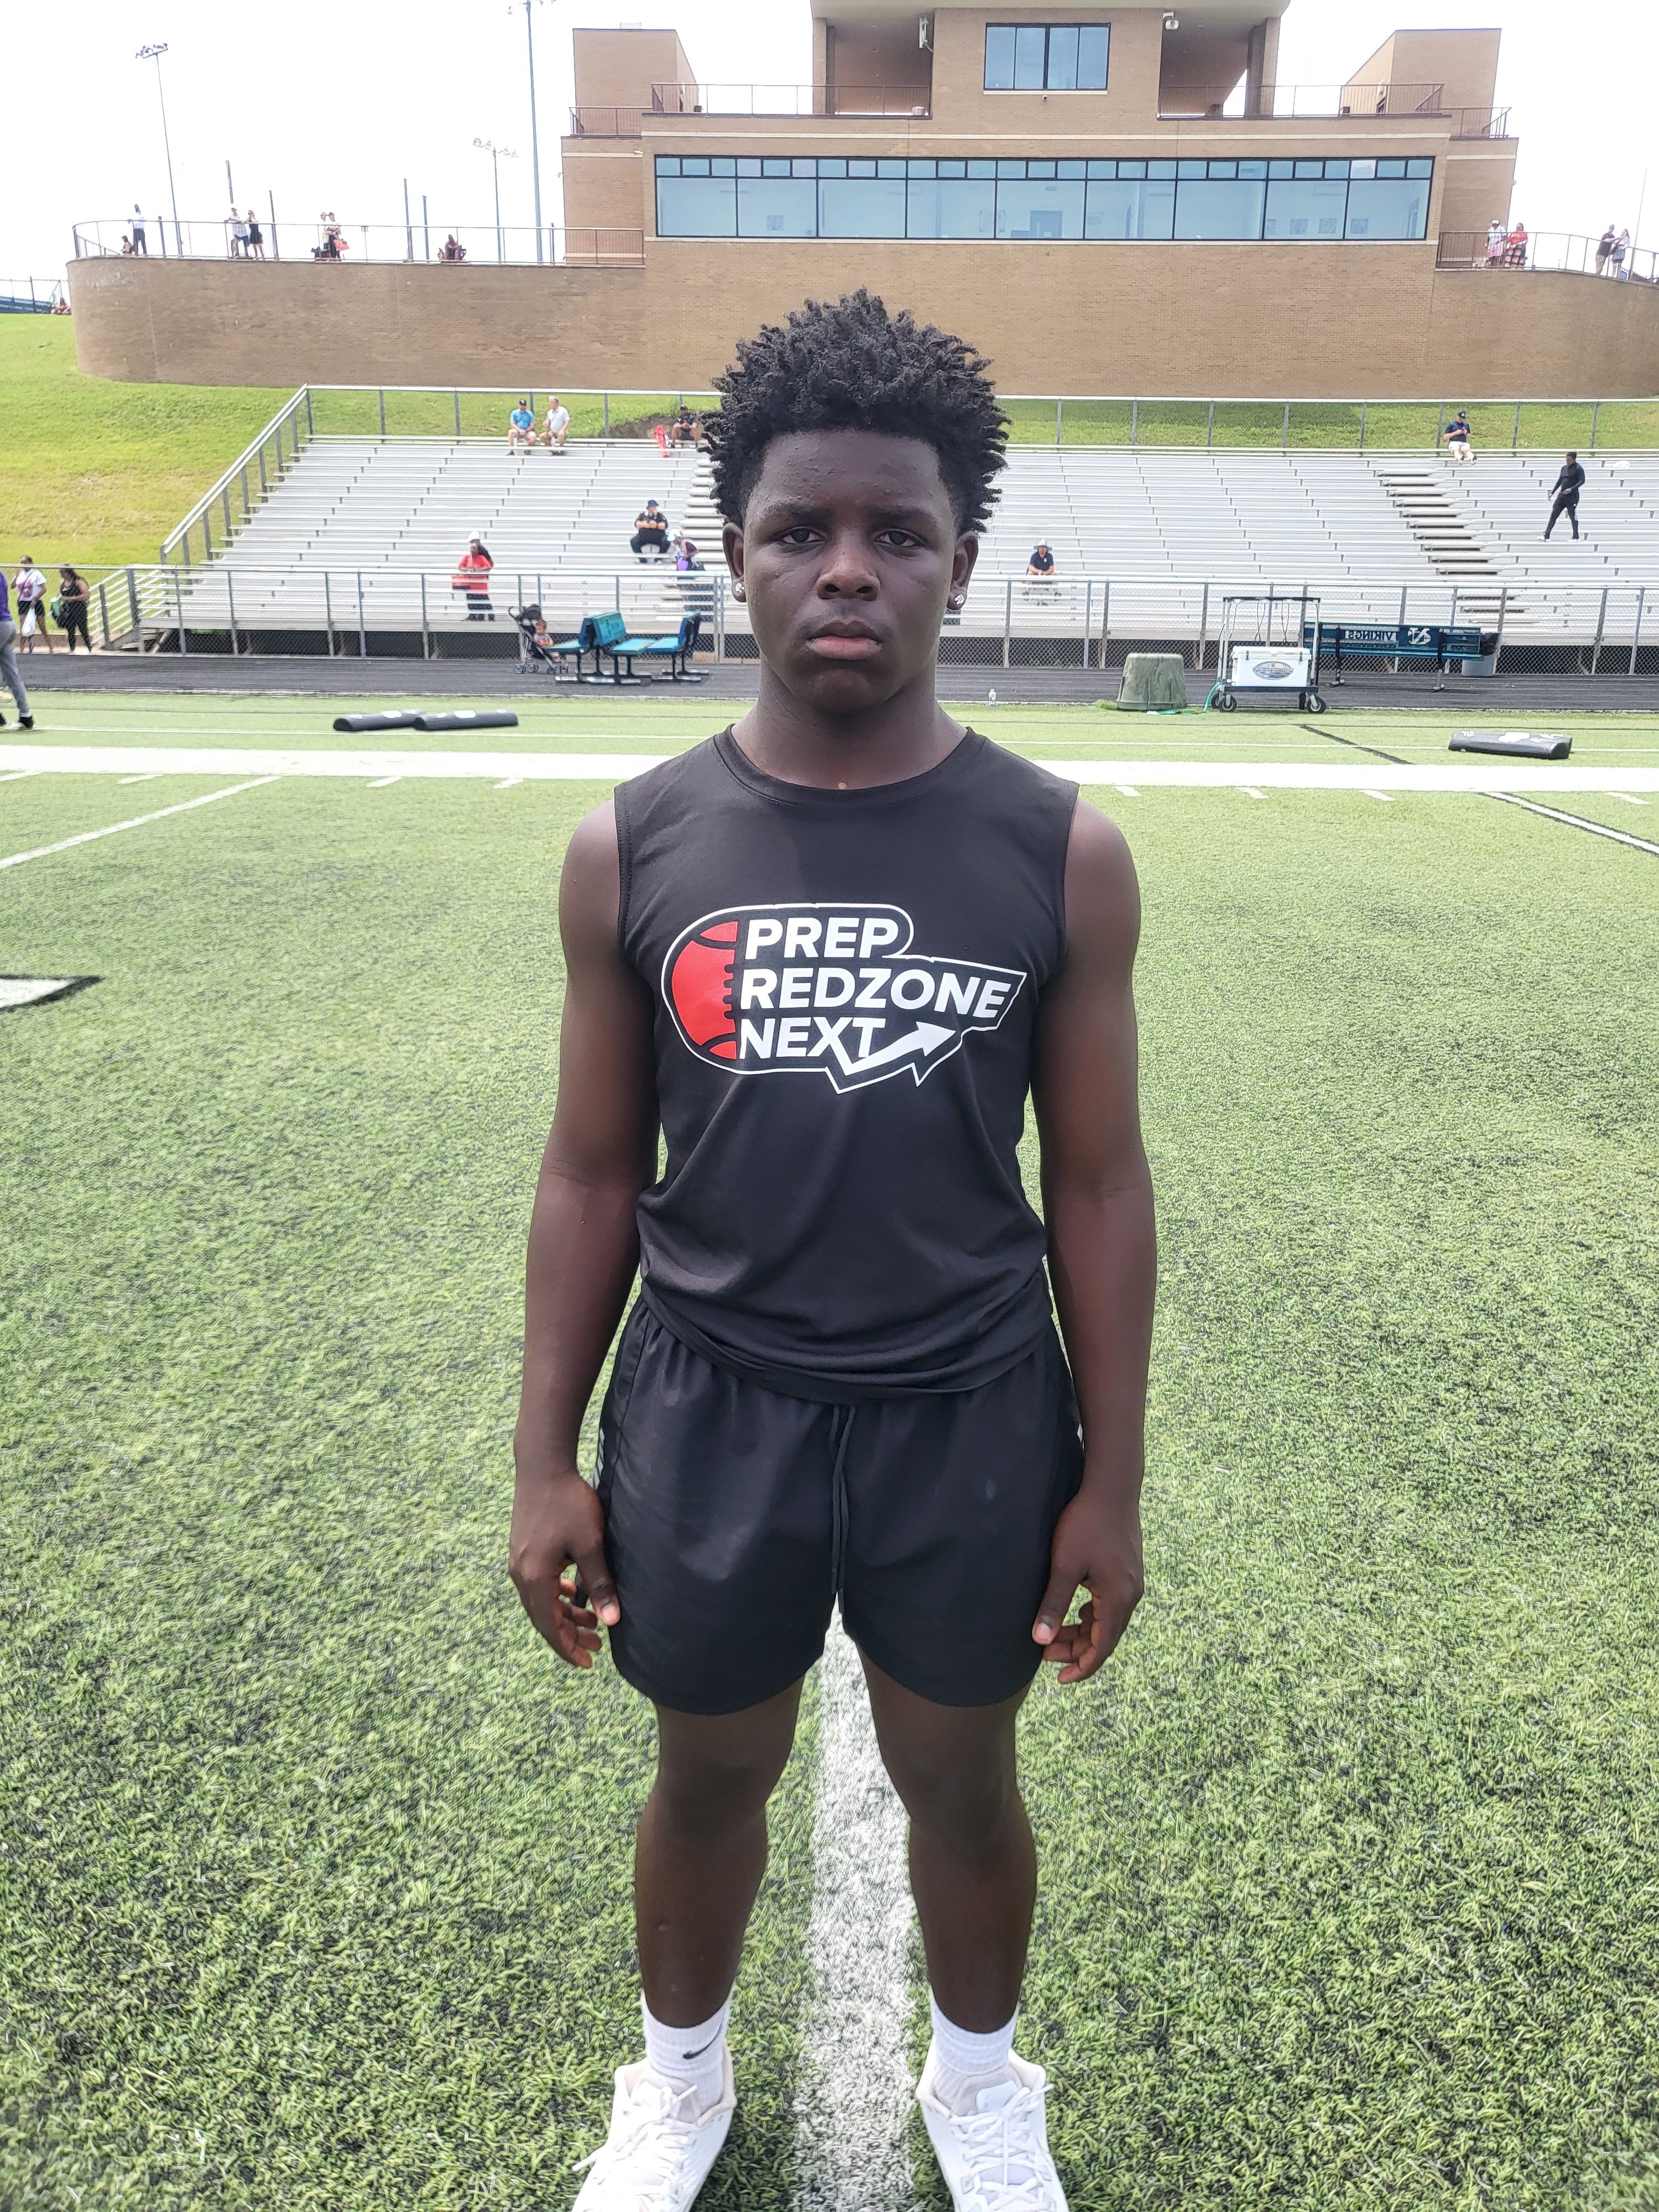 <span class="pn-tooltip pn-player-link">
        <span class="name-pointer">PRZ Next Combine Texas: 2029 Standouts</span>
        <span class="info-box not-prose" style="background: linear-gradient(to bottom, rgba(193,25,32, 0.95) 0%,rgba(193,25,32, 1) 100%)">
            <a href="https://prepredzone.com/2024/05/prz-next-combine-texas-2029-standouts/" class="link-wrap">
                                    <span class="player-img"><img src="https://prepredzone.com/wp-content/uploads/sites/3/2024/03/PRZCombineSeries_Header-crop-696x457-1715284064.jpg?w=150&h=150&crop=1" alt="PRZ Next Combine Texas: 2029 Standouts"></span>
                
                <span class="player-details">
                    <span class="first-name">PRZ</span>
                    <span class="last-name">Next Combine Texas: 2029 Standouts</span>
                    <span class="measurables">
                                            </span>
                                    </span>
                <span class="player-rank">
                                                        </span>
                                    <span class="state-abbr"></span>
                            </a>

            
        </span>
    </span>
